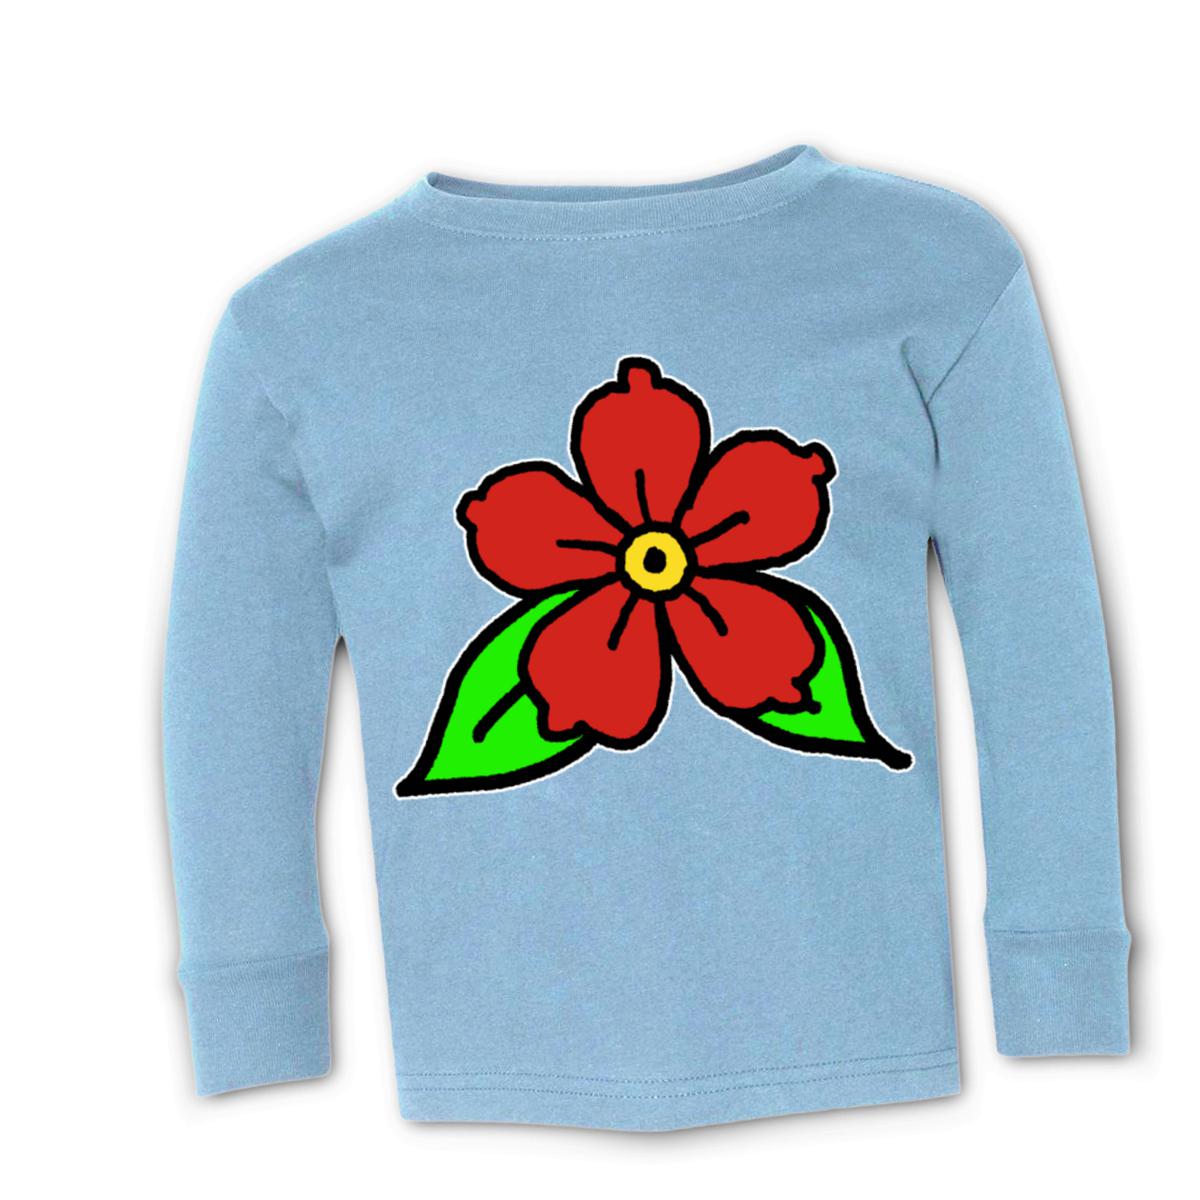 American Traditional Flower Kid's Long Sleeve Tee Small light-blue